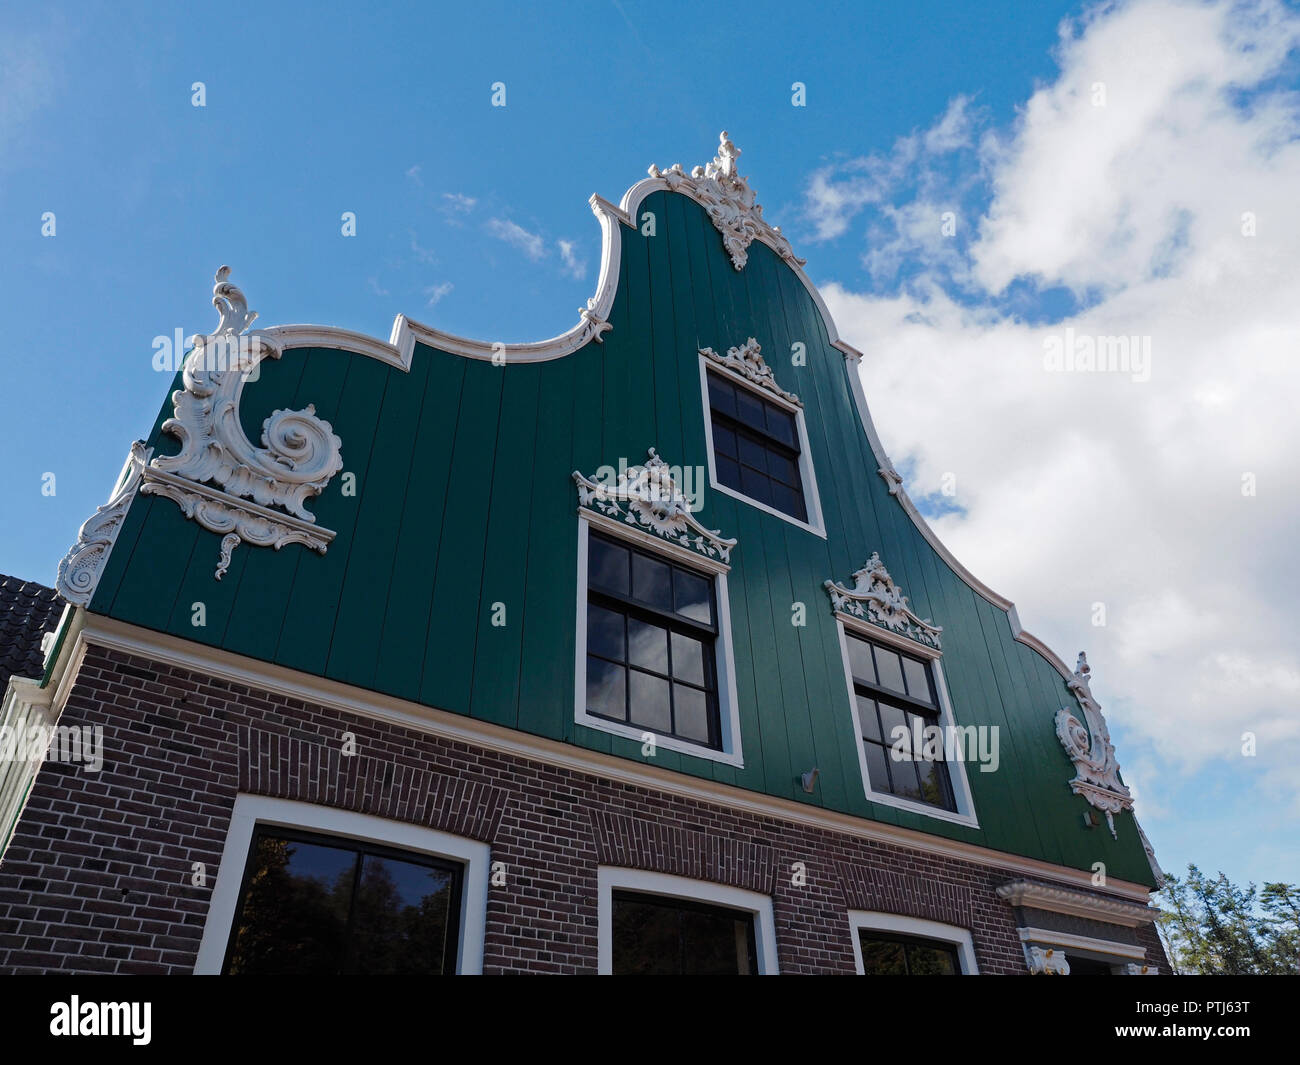 Typical zaanse schans wooden building details, photographed in the open air museum in Arnhem, the Netherlands Stock Photo